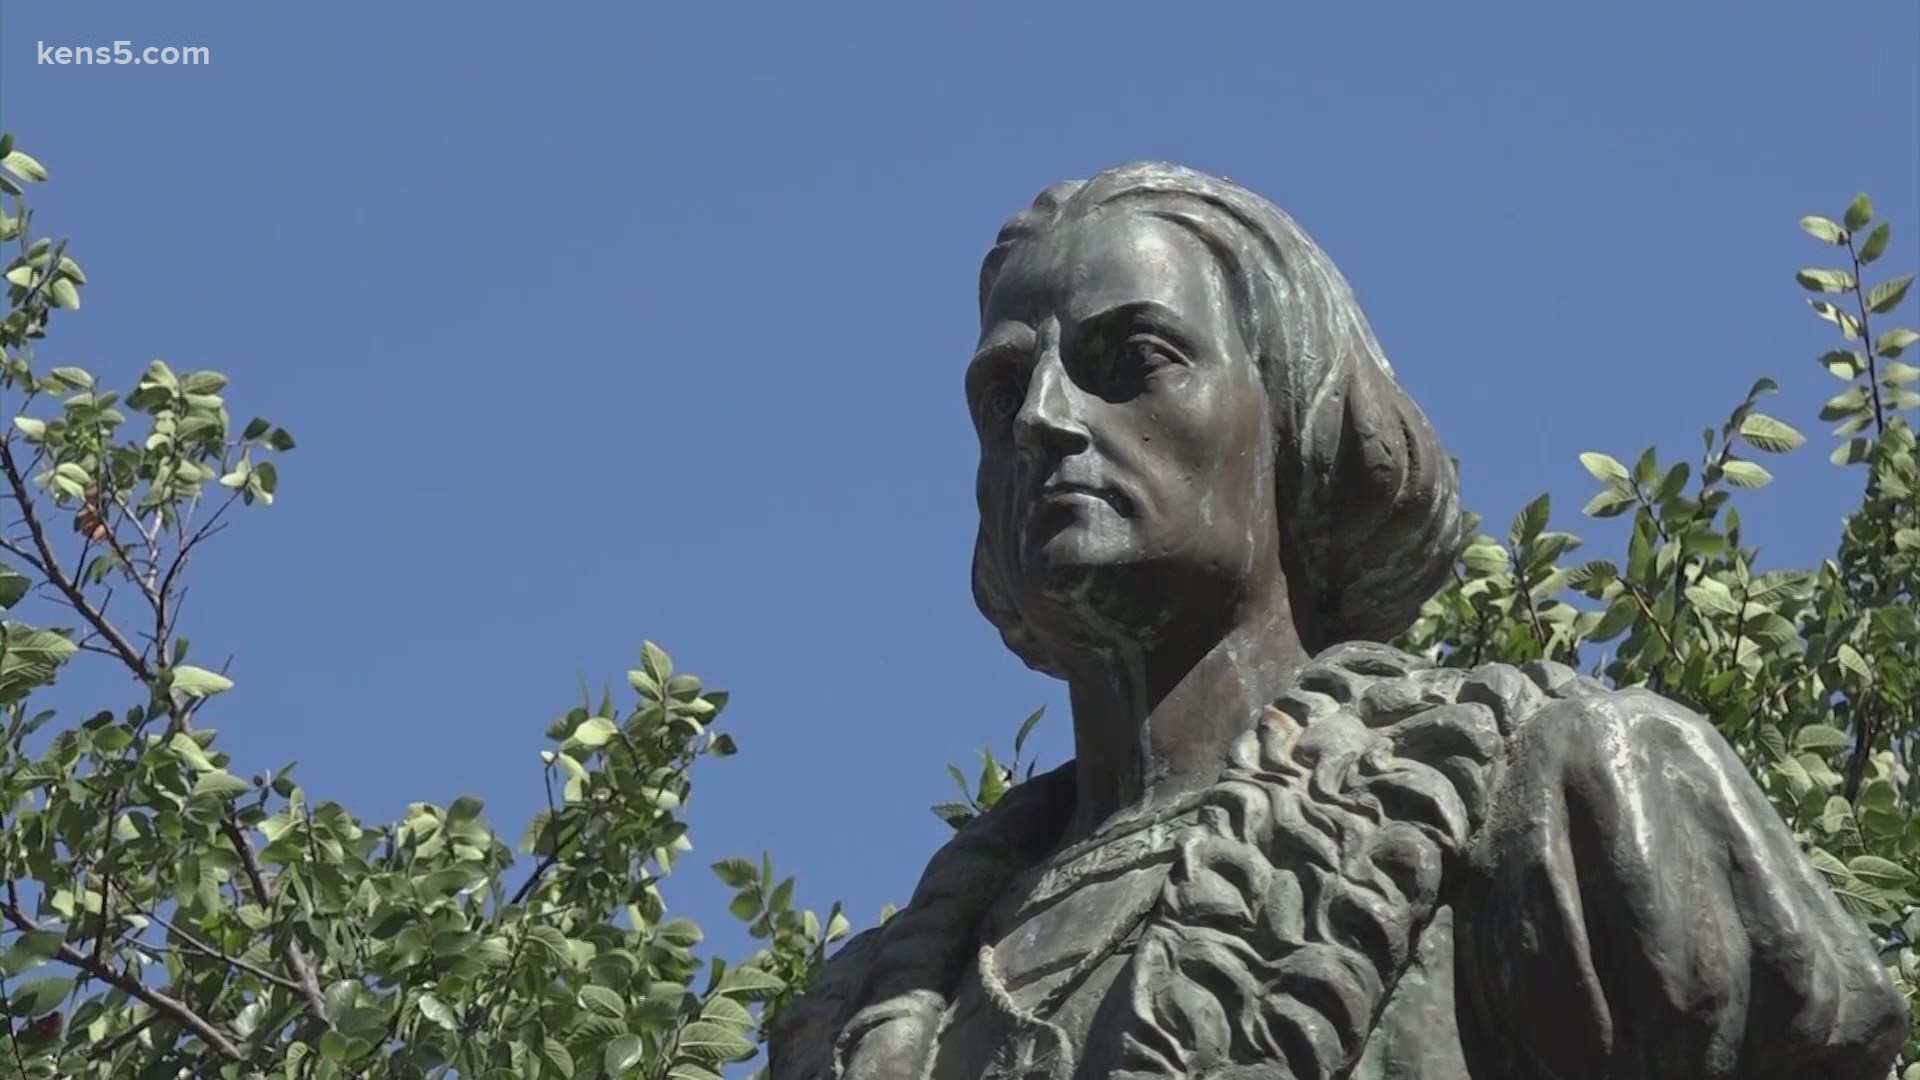 Councilman Roberto Trevino filed a request that honors the Italian community in SA. It asks to remove the statue of Christopher Columbus and rename the park.